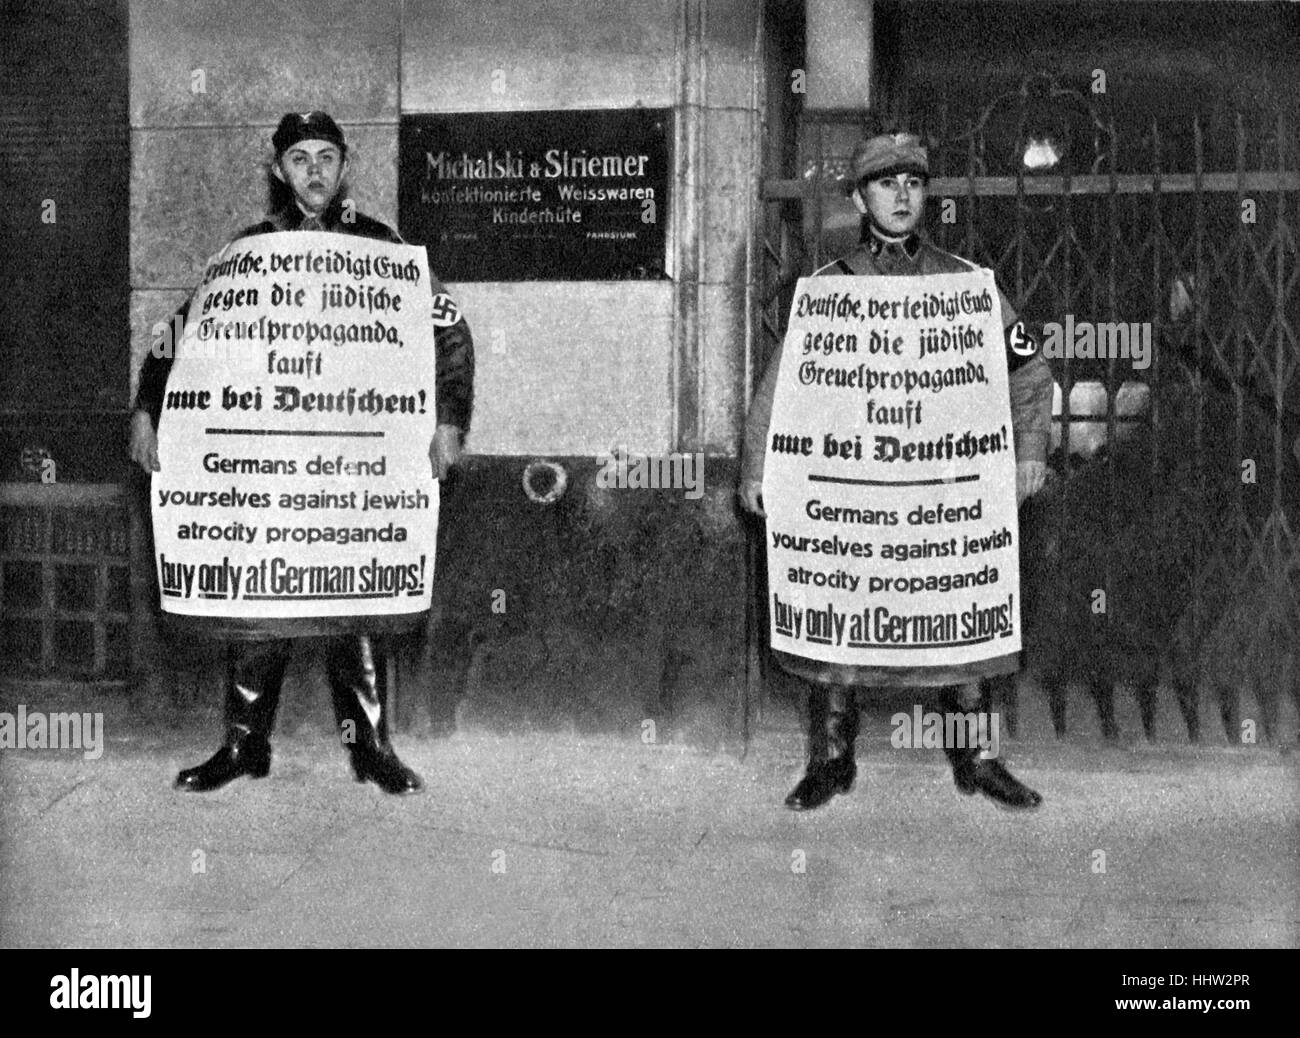 Antisemitic propoganda, anti-Jewish campaign in Germany, 1933. Rise of Fascism in the inter-war period in Germany. Signs urge Stock Photo